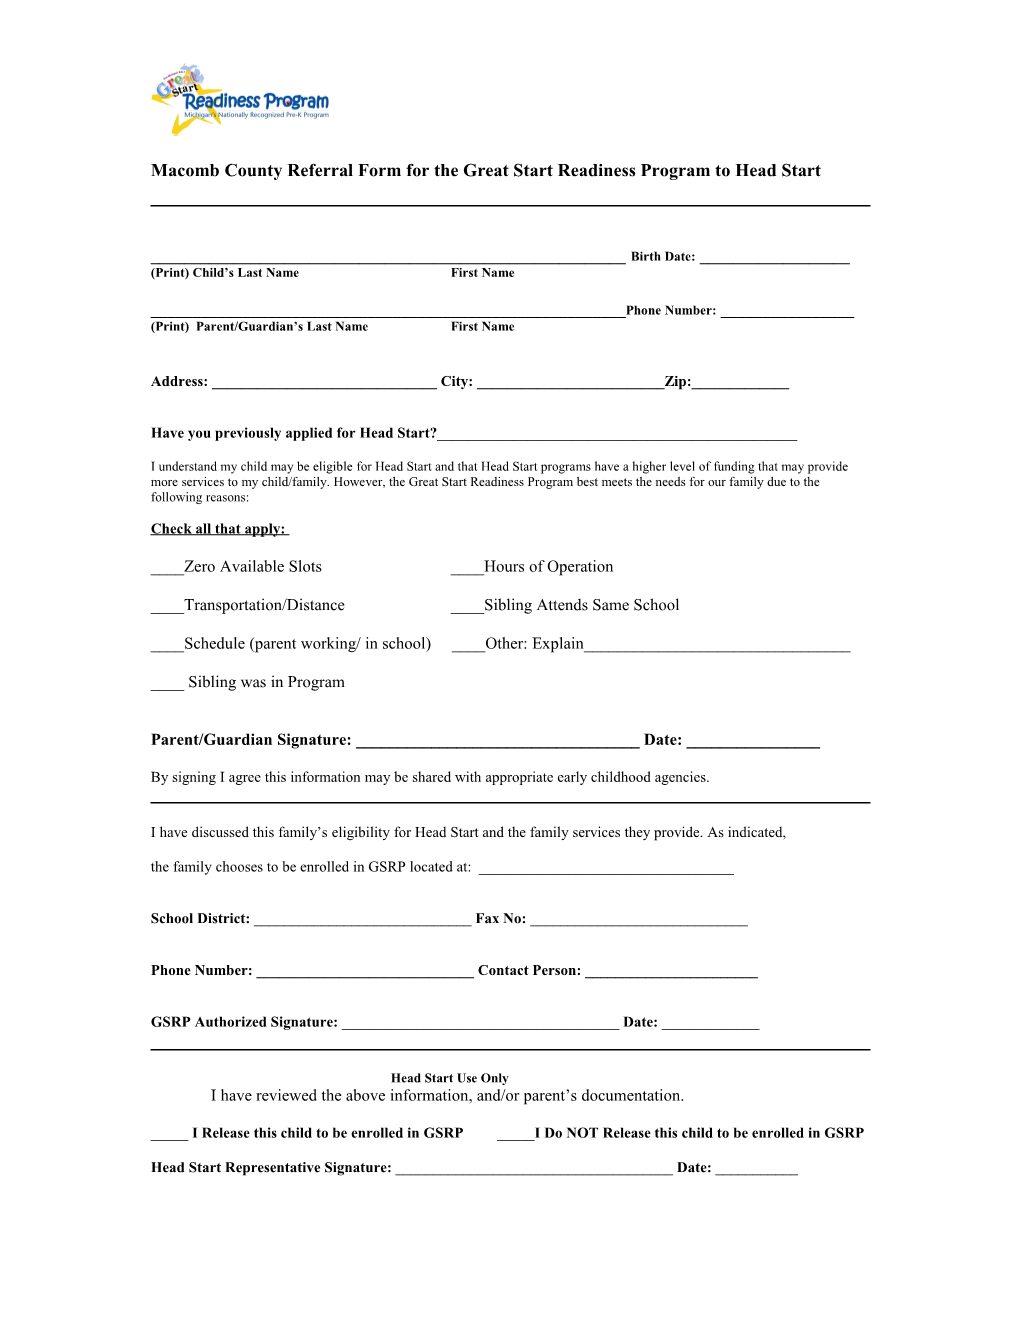 Referral Form for the Great Start Readiness Program to Head Start